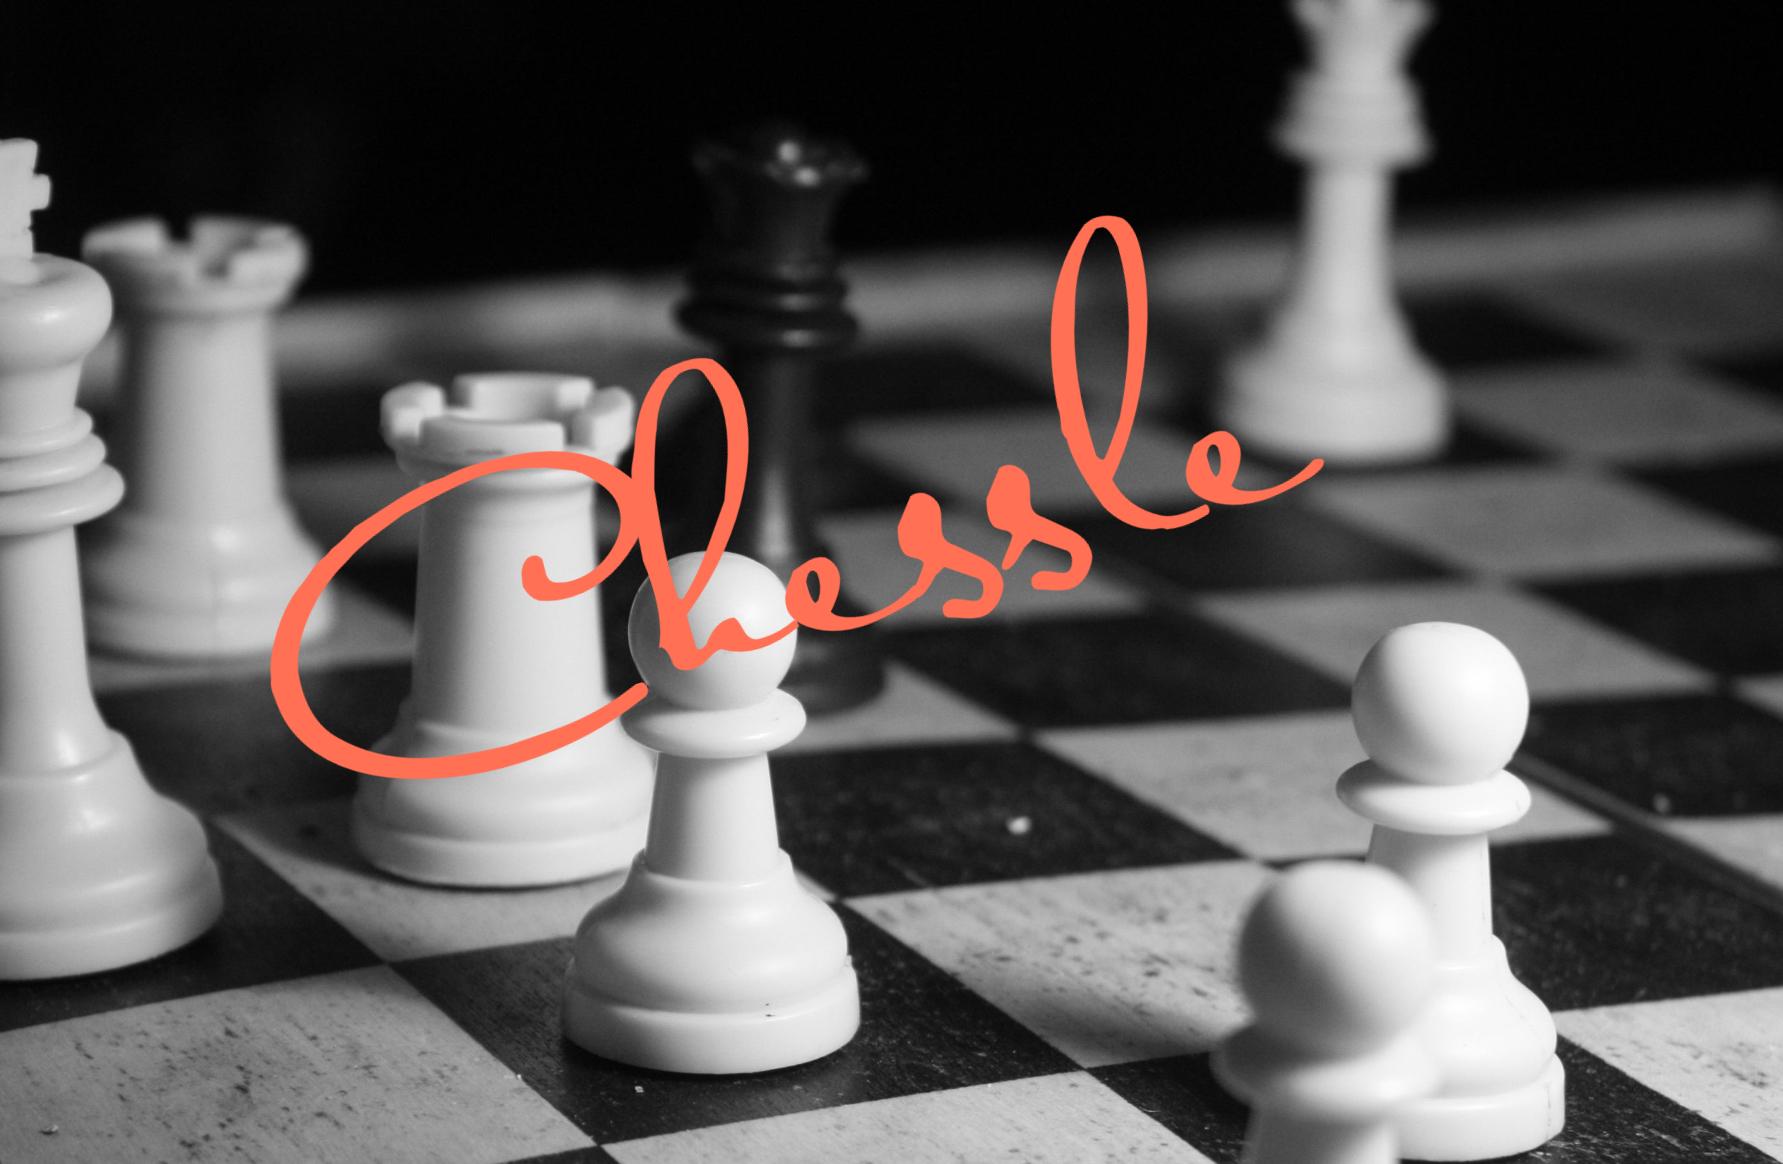 Chessle–Wordle But For Chess Openings –